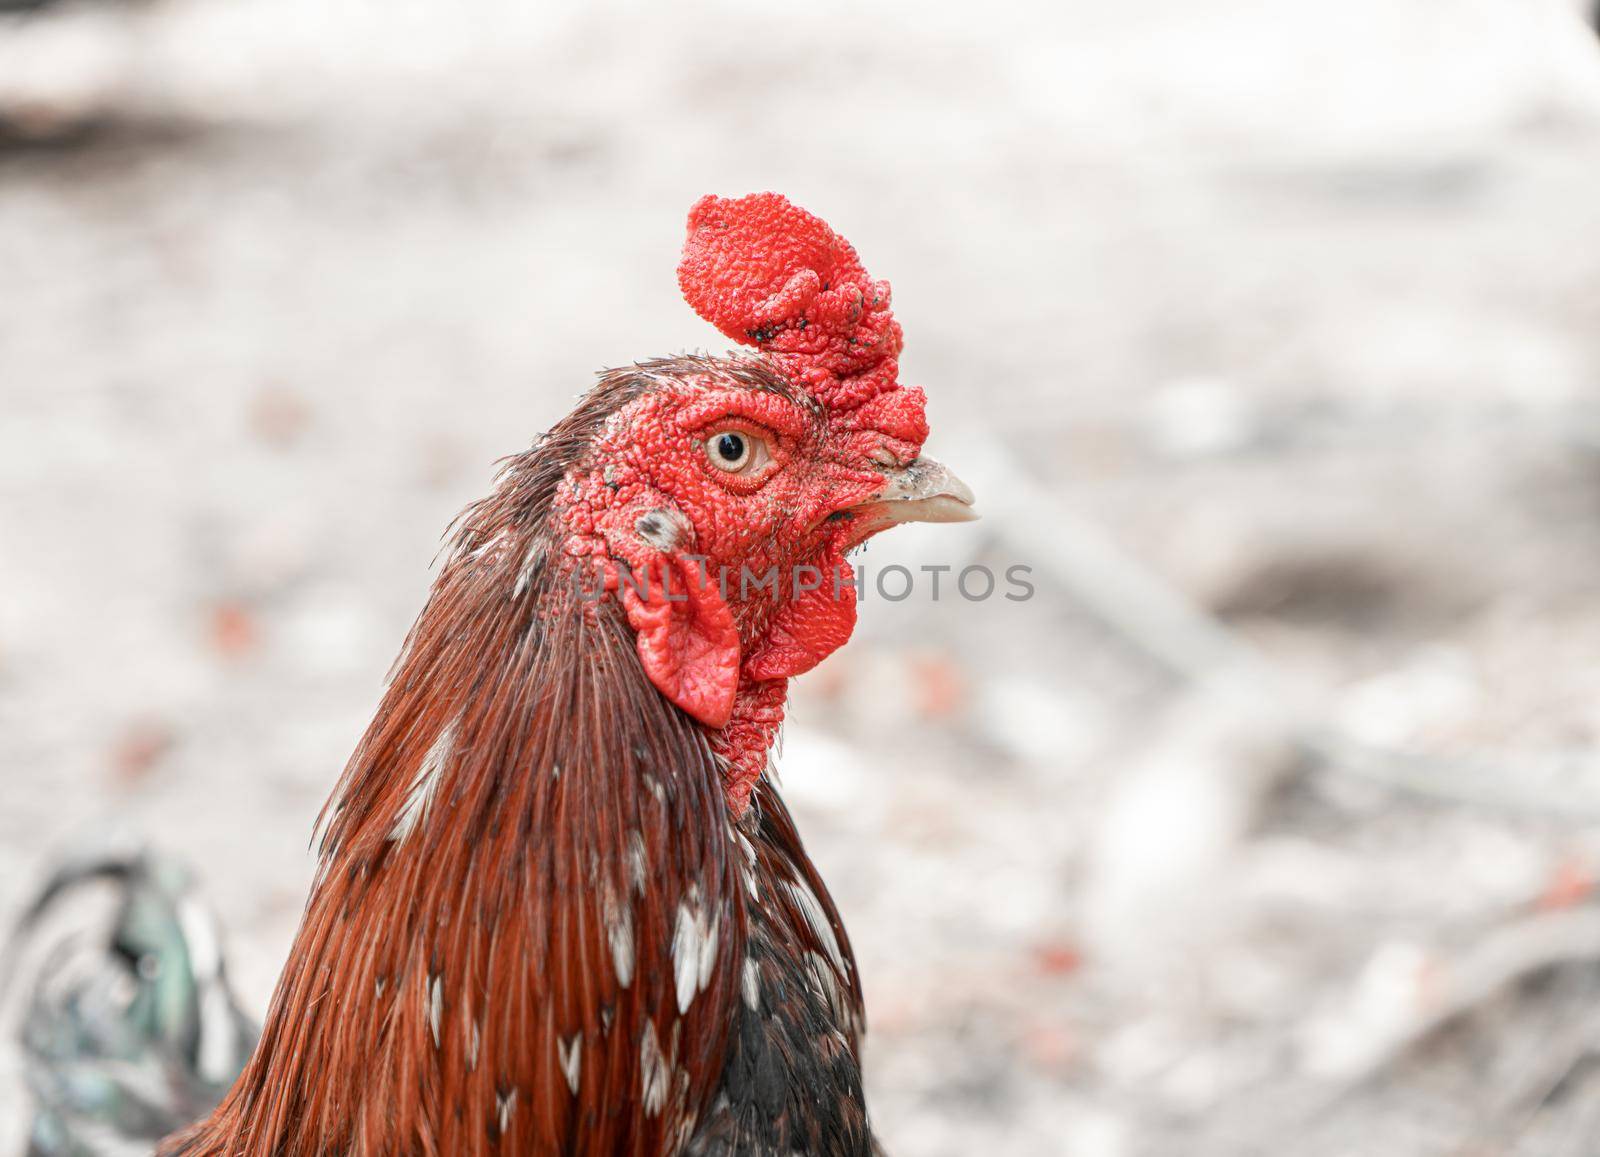 Close up chicken face on nature background by Buttus_casso